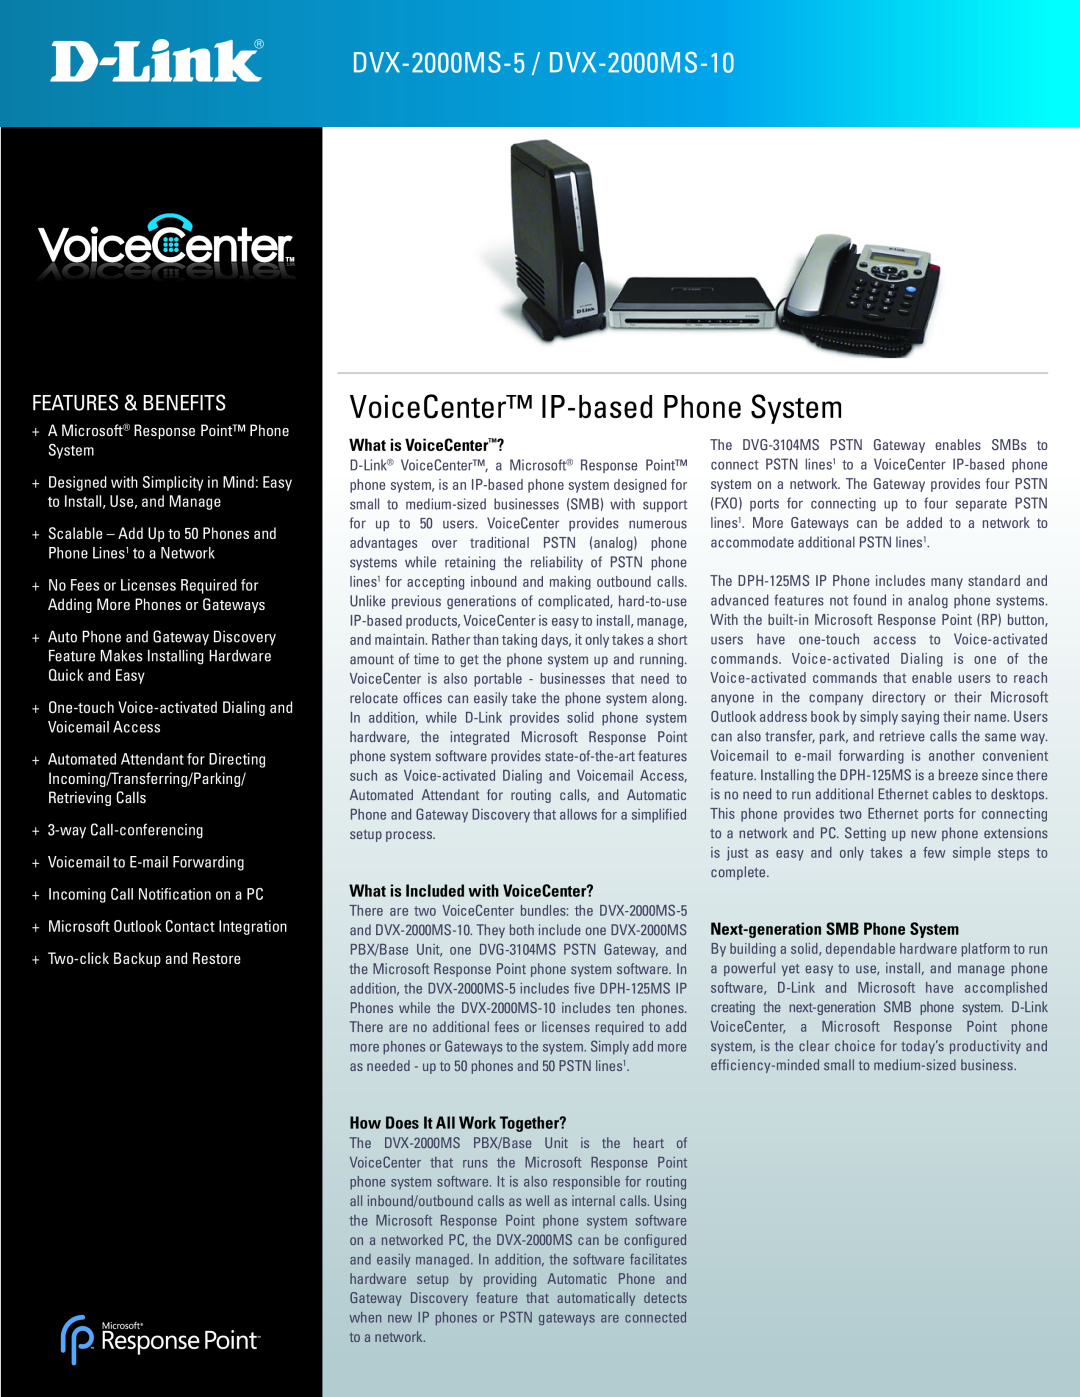 D-Link manual DVX-2000MS-5 / DVX-2000MS-10, VoiceCenter IP-based Phone System, Features & Benefits 